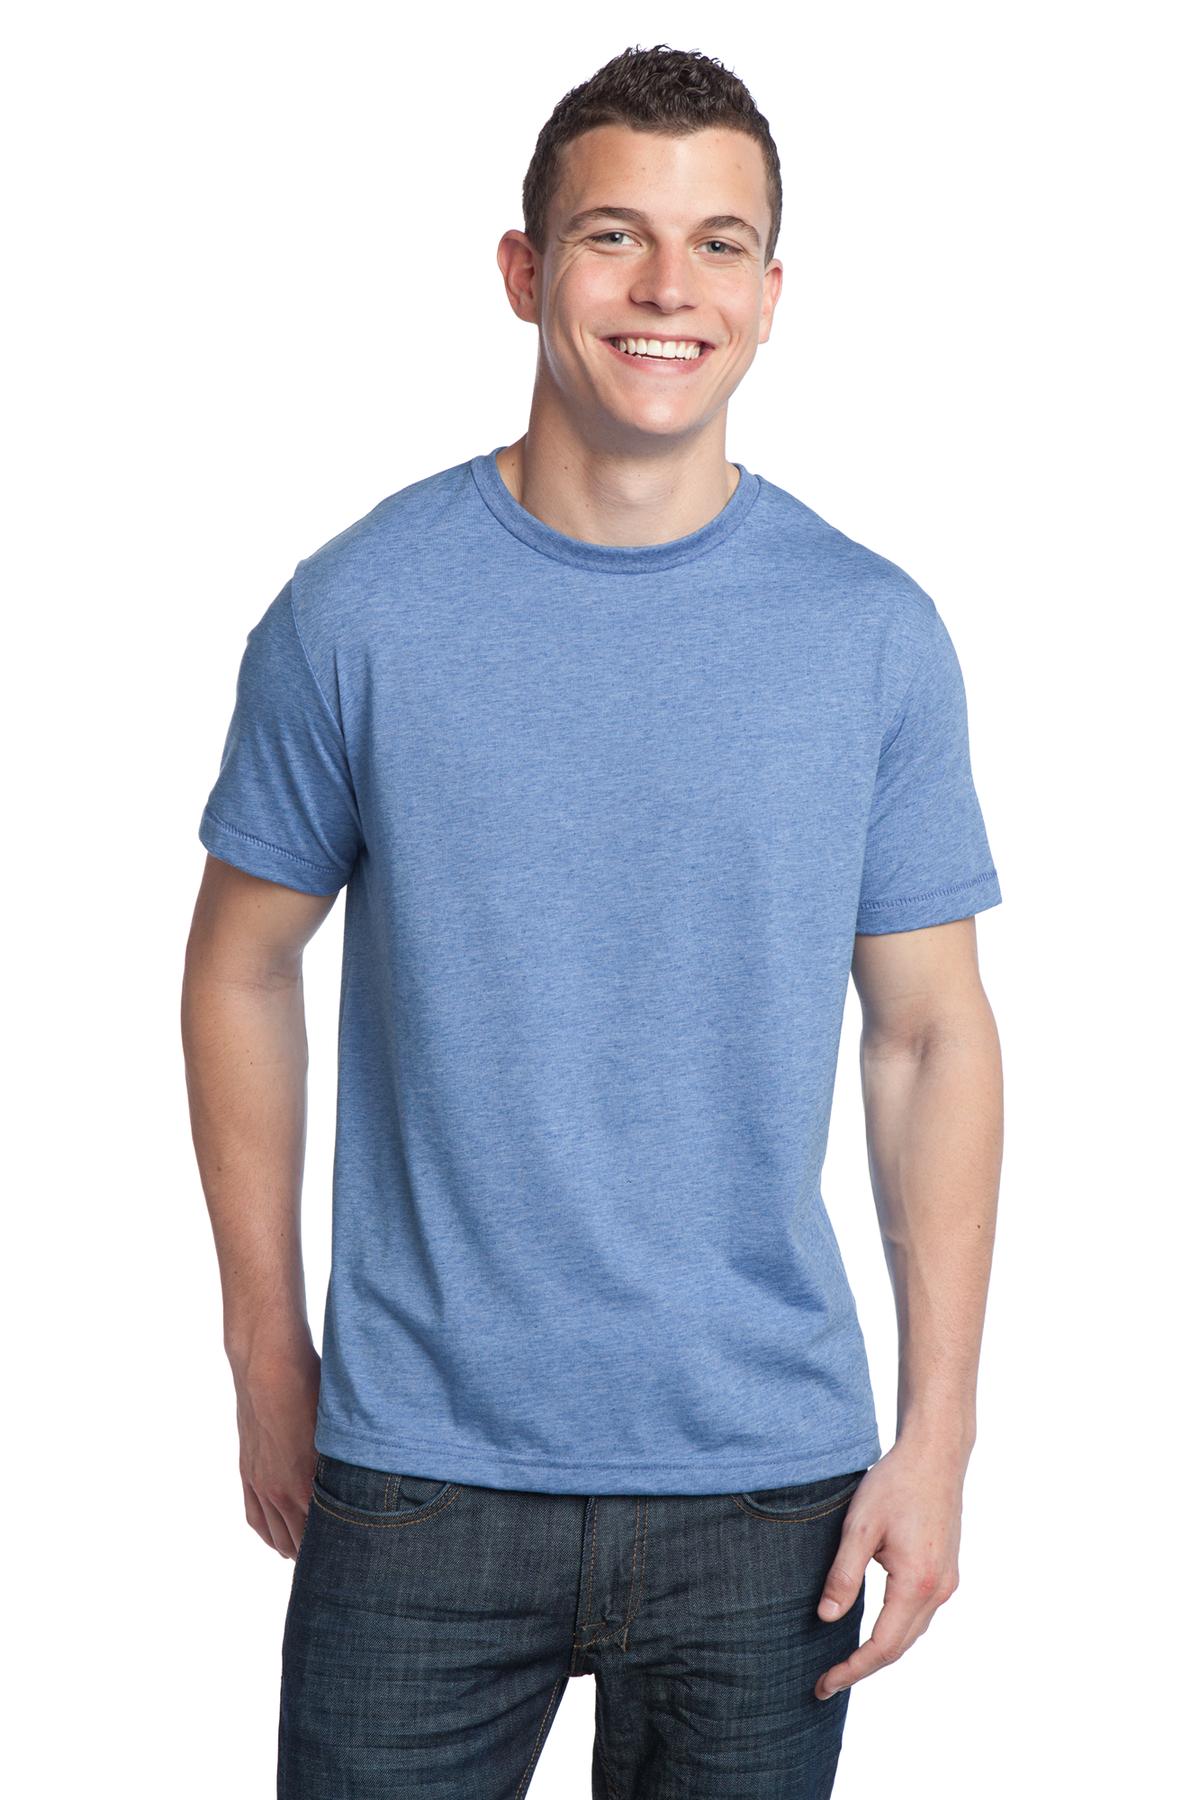 DISCONTINUED District - Young Mens Tri-Blend Crewneck Tee. DT142